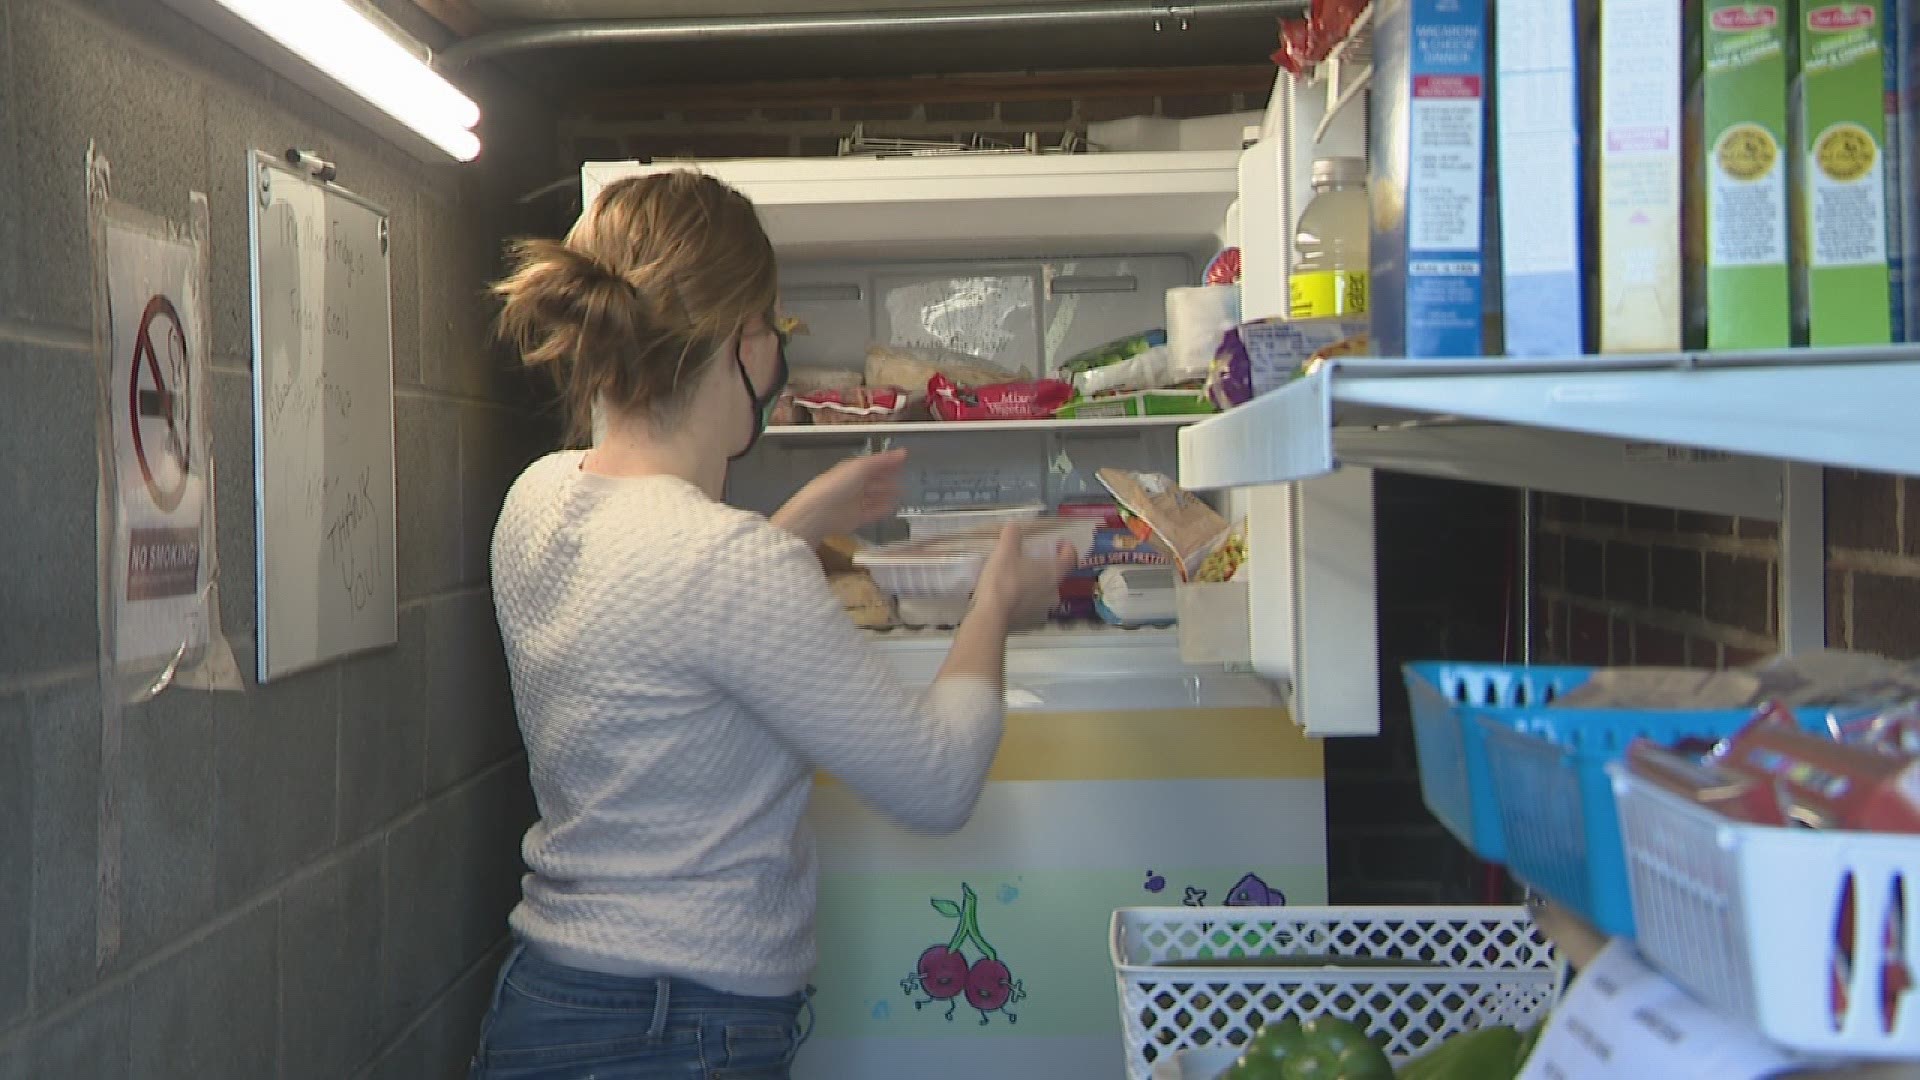 Elizabeth VanCamp co-founded the Minnie Fridge in December 2020, and it continues to grow.